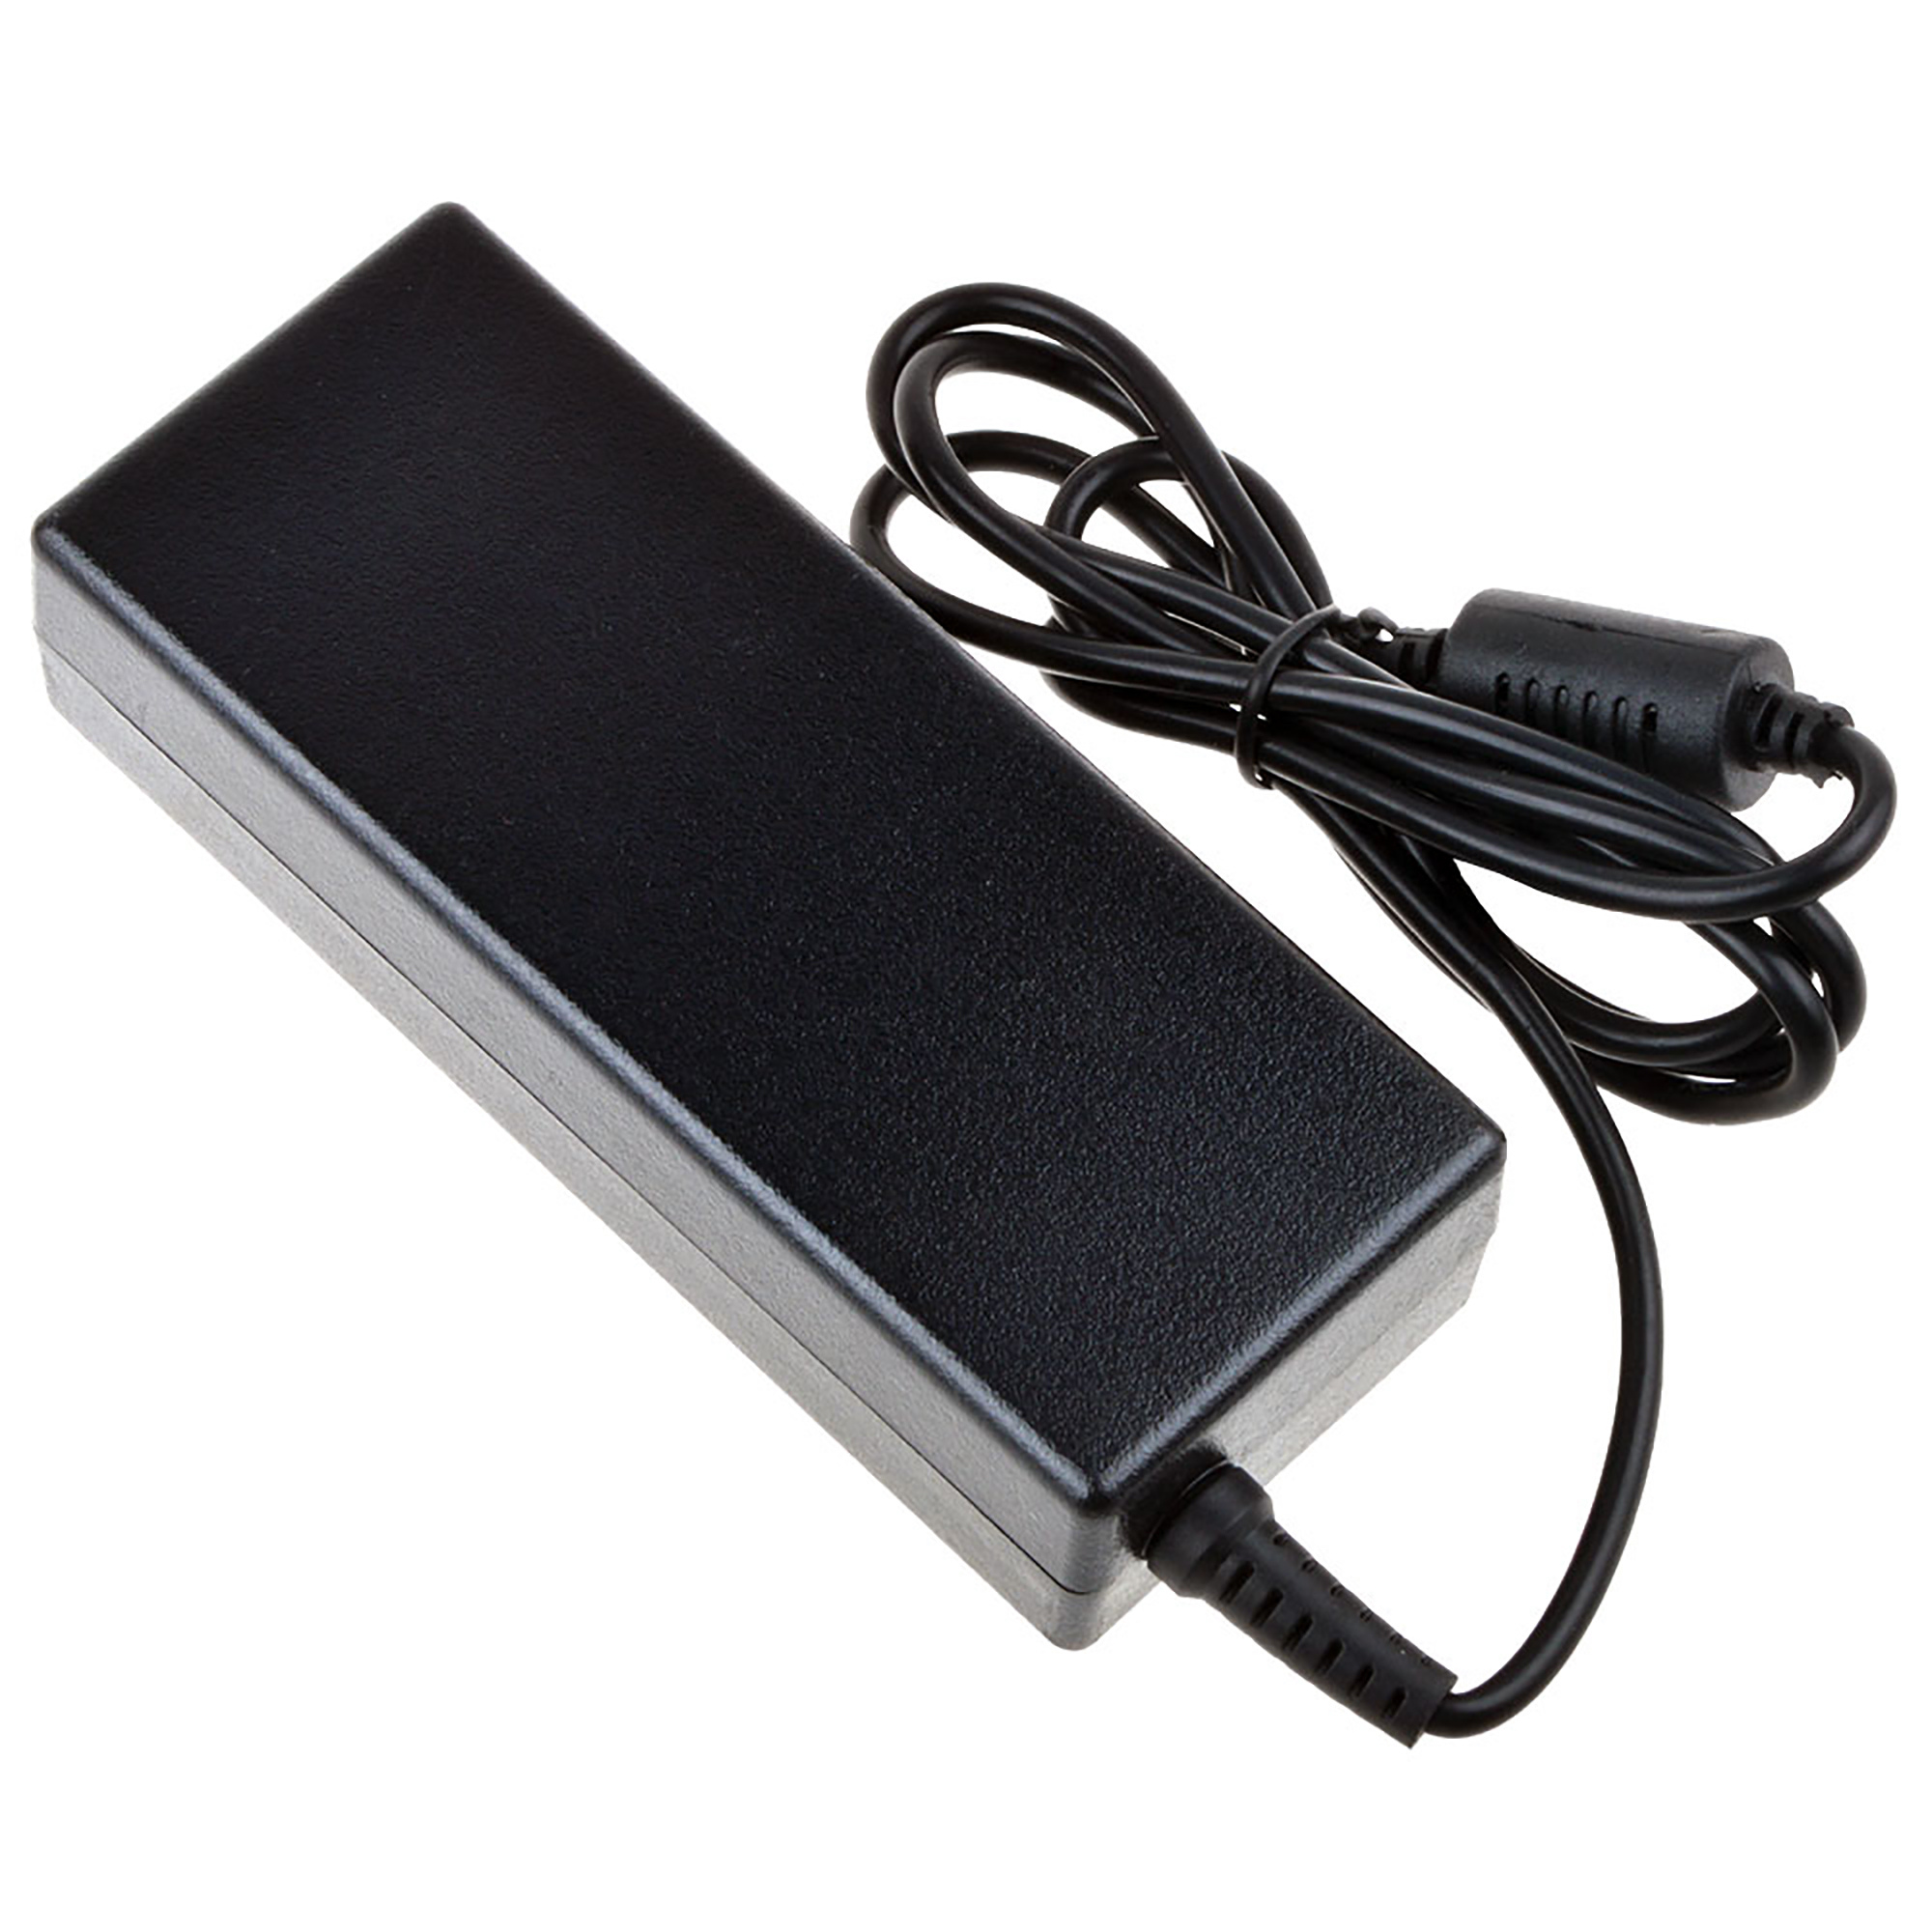 PKPOWER AC Adapter Replacement for Vizio VSB210WS Sound Bar Speaker Wireless Subwoofer Power Supply - image 3 of 5